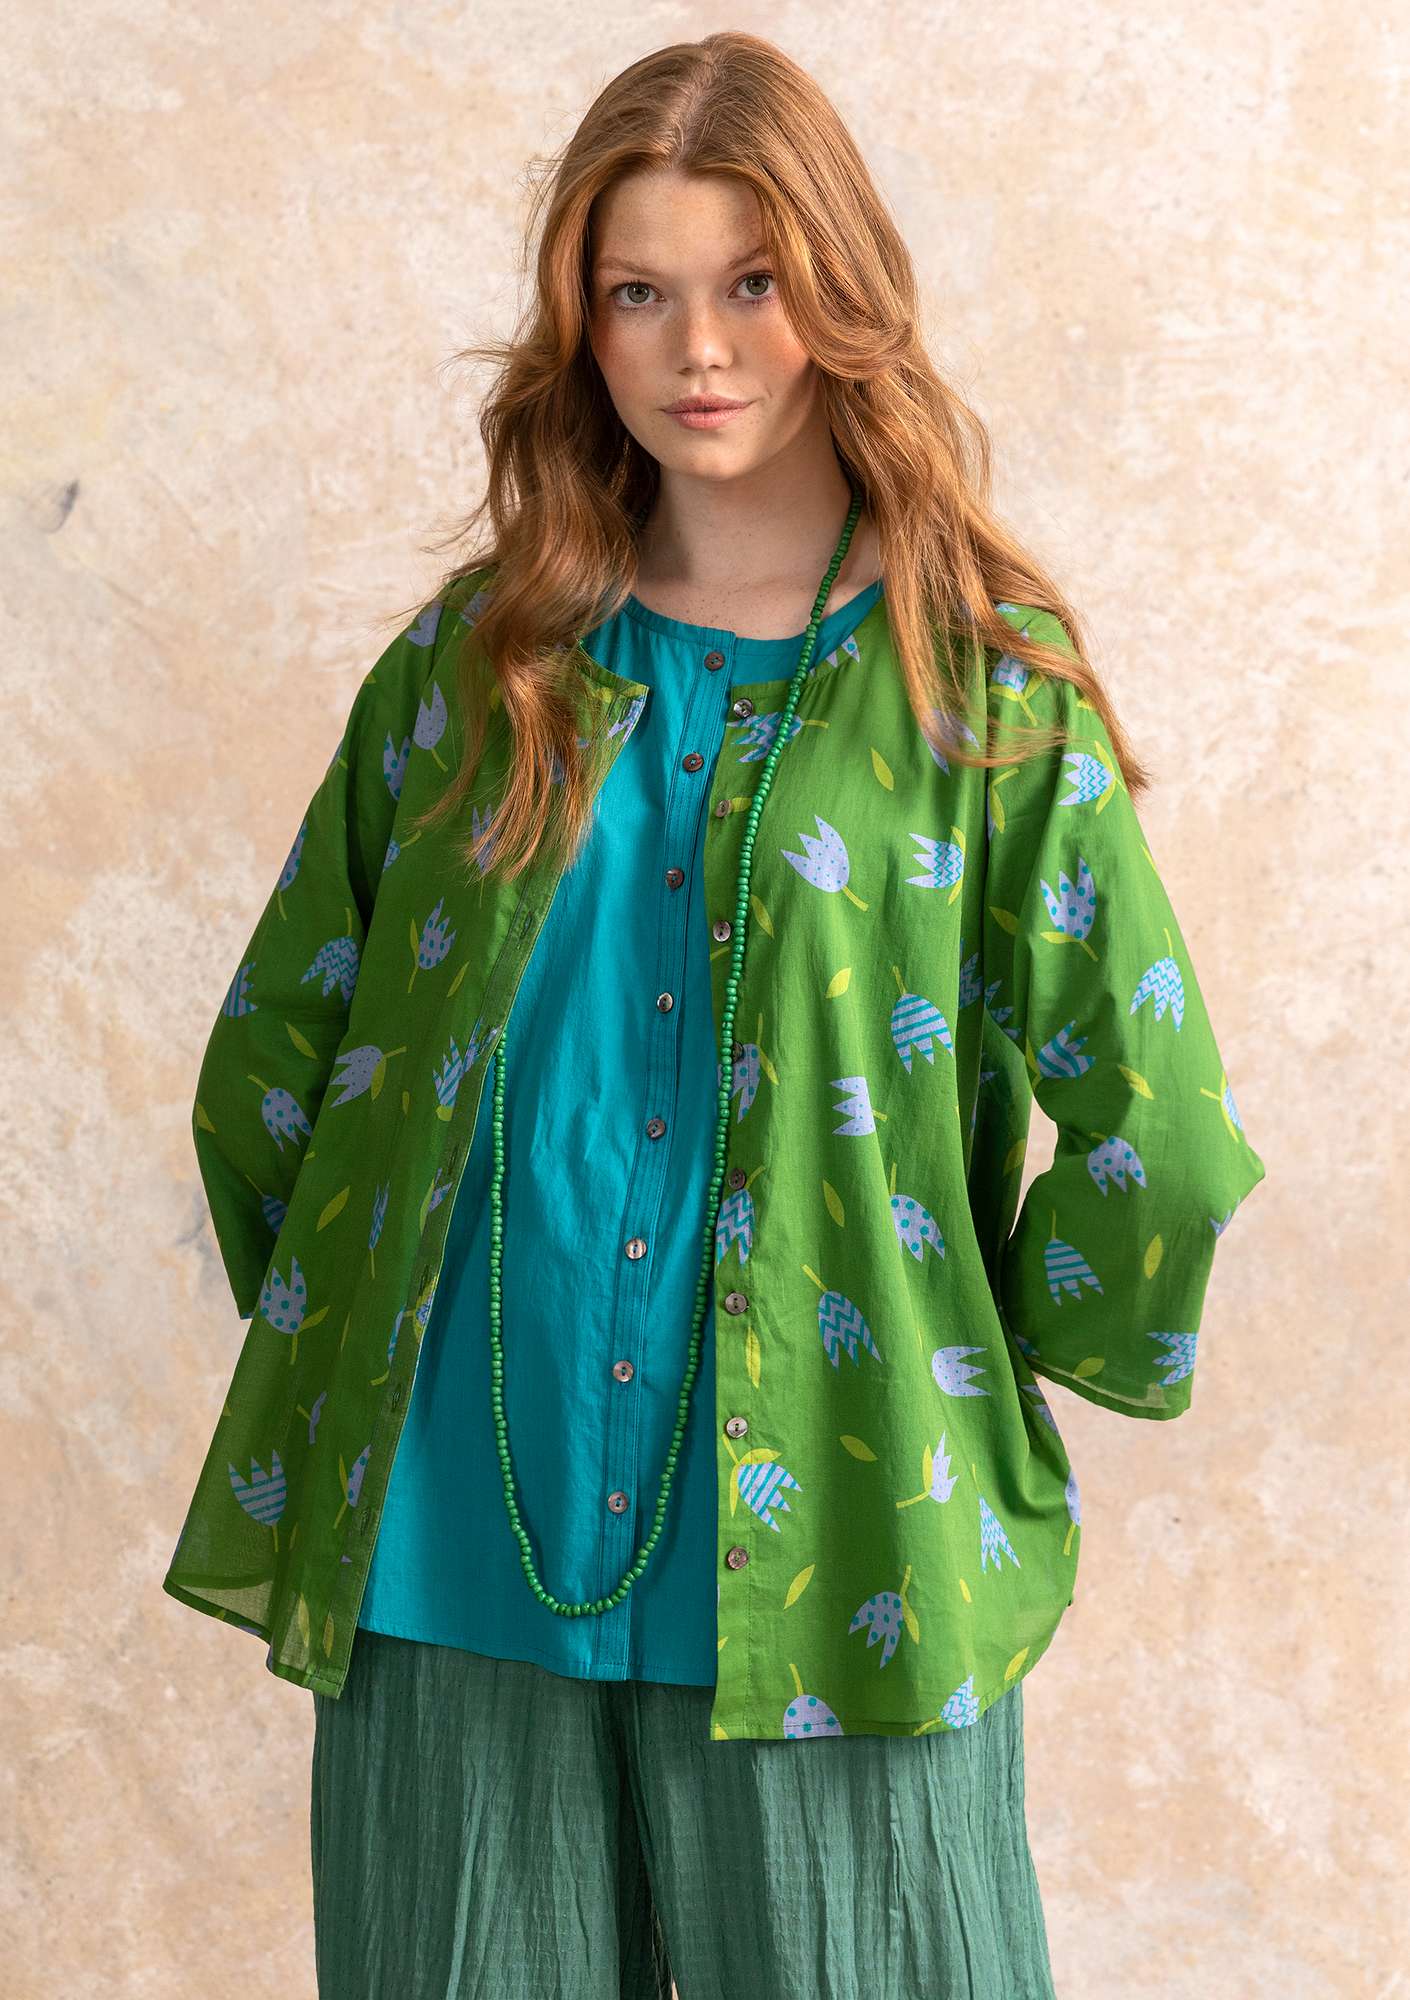 Blus Evelyn cactus/patterned